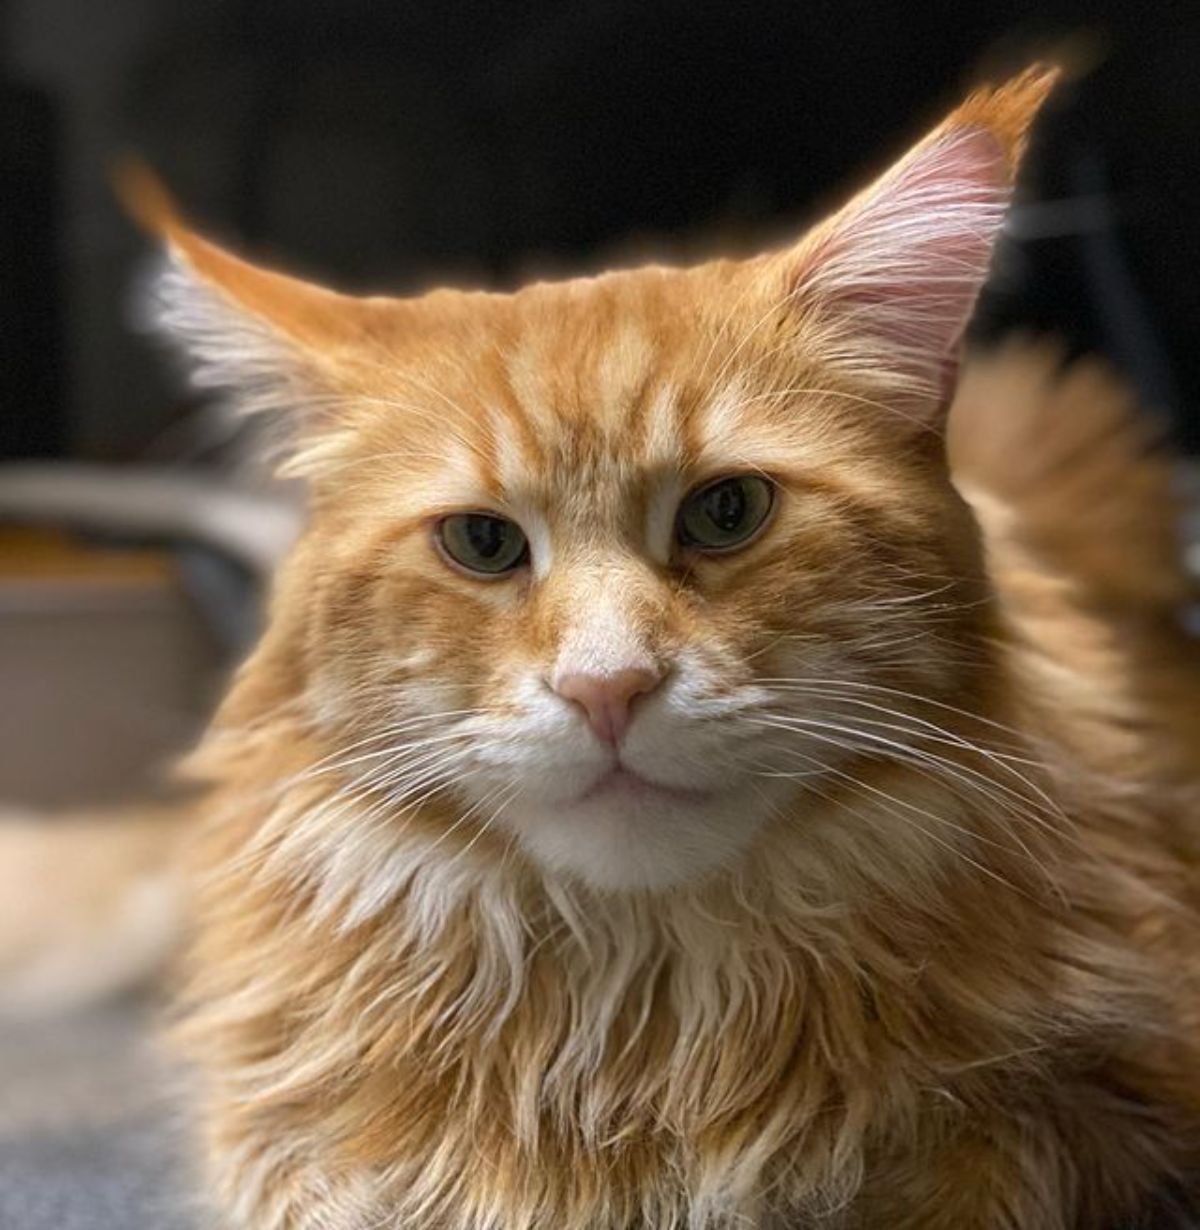 A close-up of a ginger maine coon face.